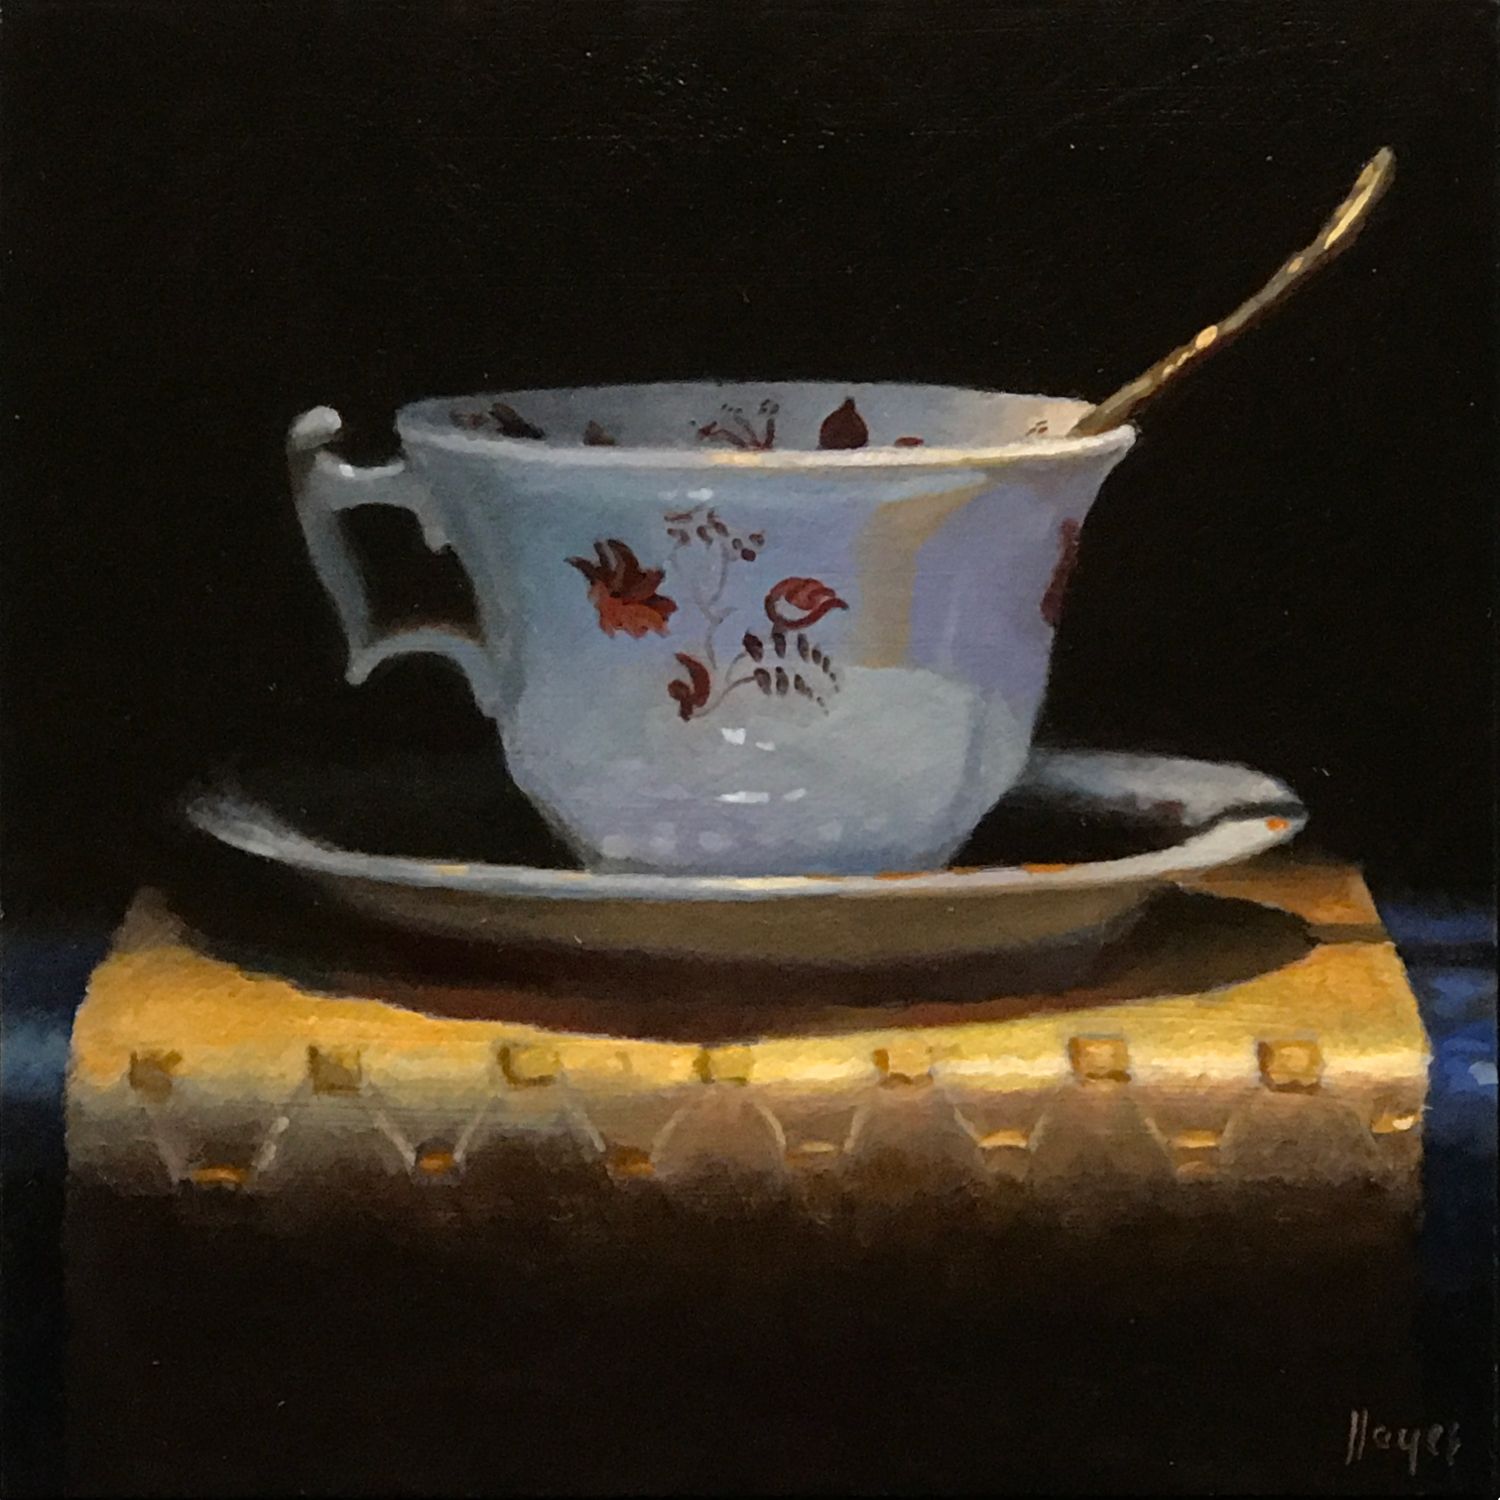 "Teacup with Gold Brocade"
oil on panel, 5x5 inches